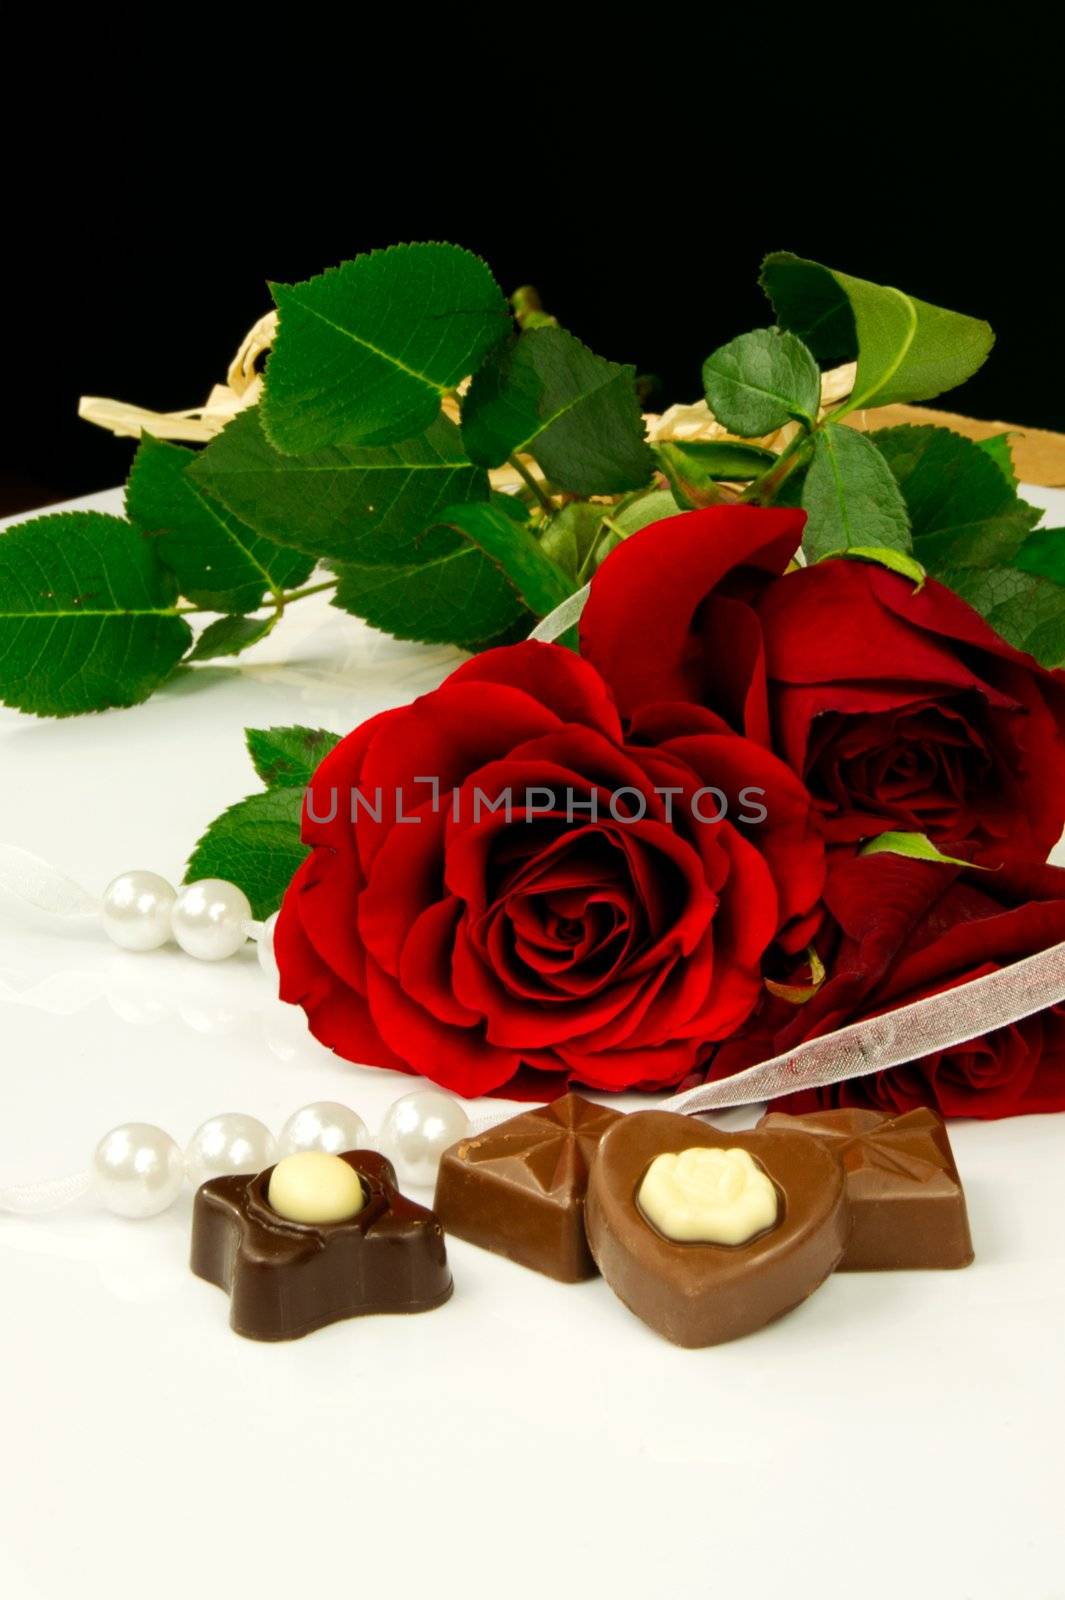 Rose, pearls and chocolate. Traditional beauty valentine composi by simpson33